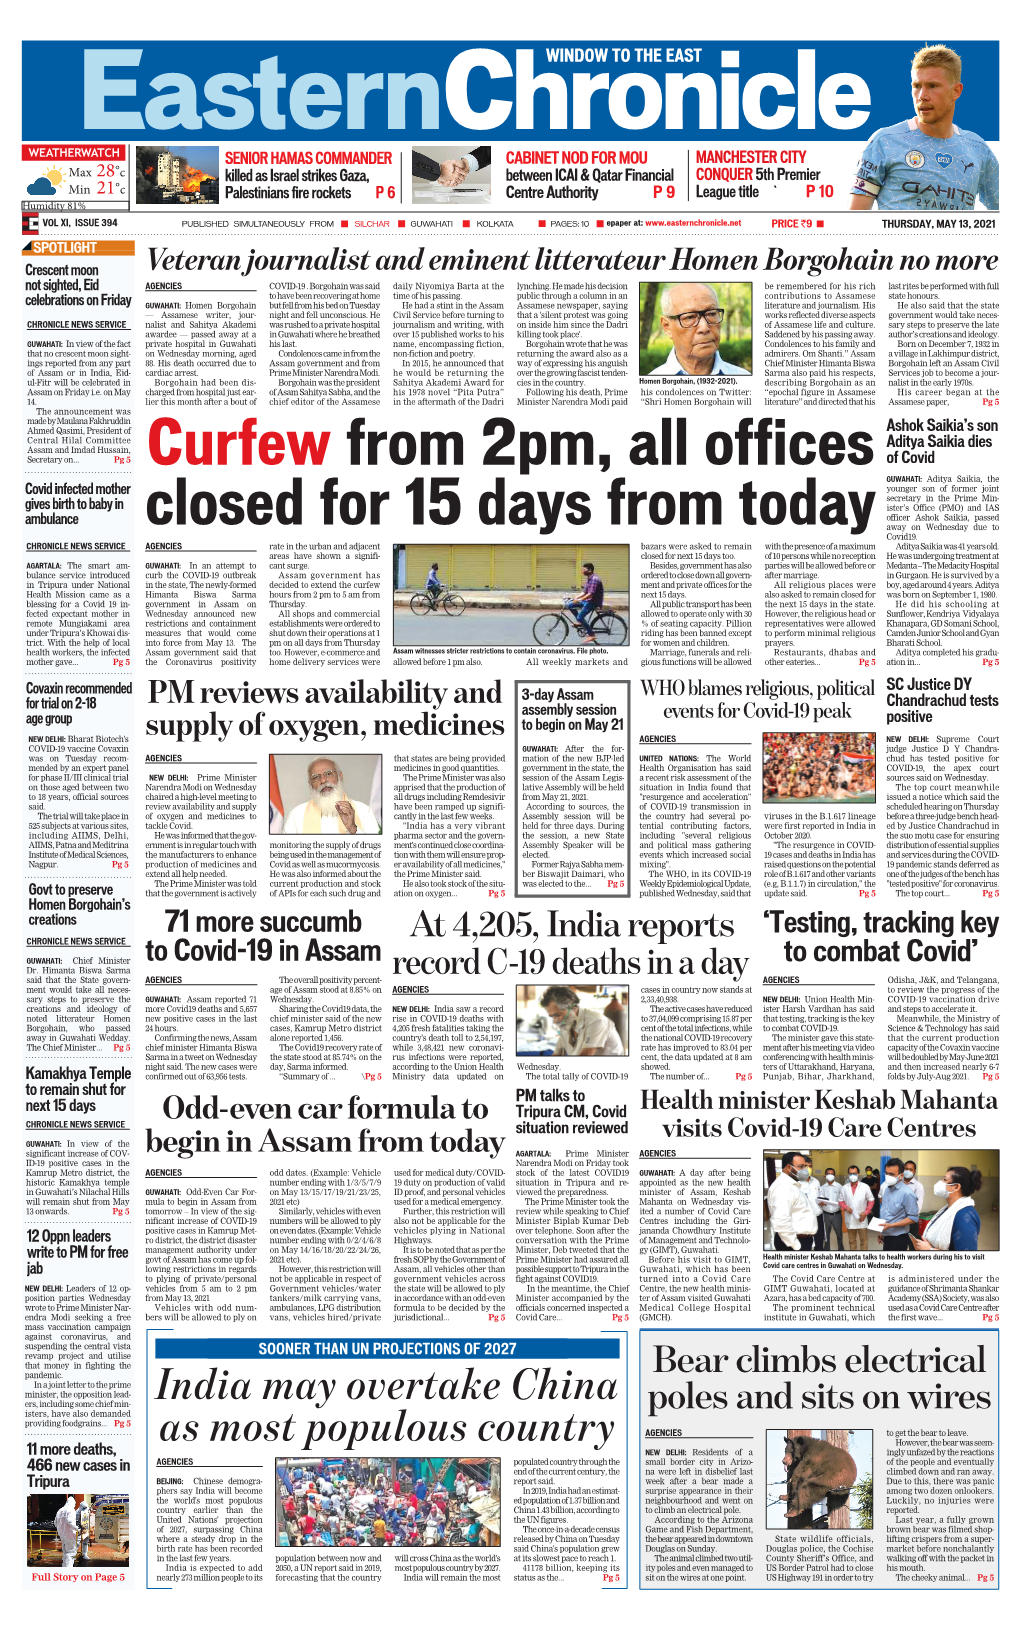 Curfew from 2Pm, All Offices Closed for 15 Days